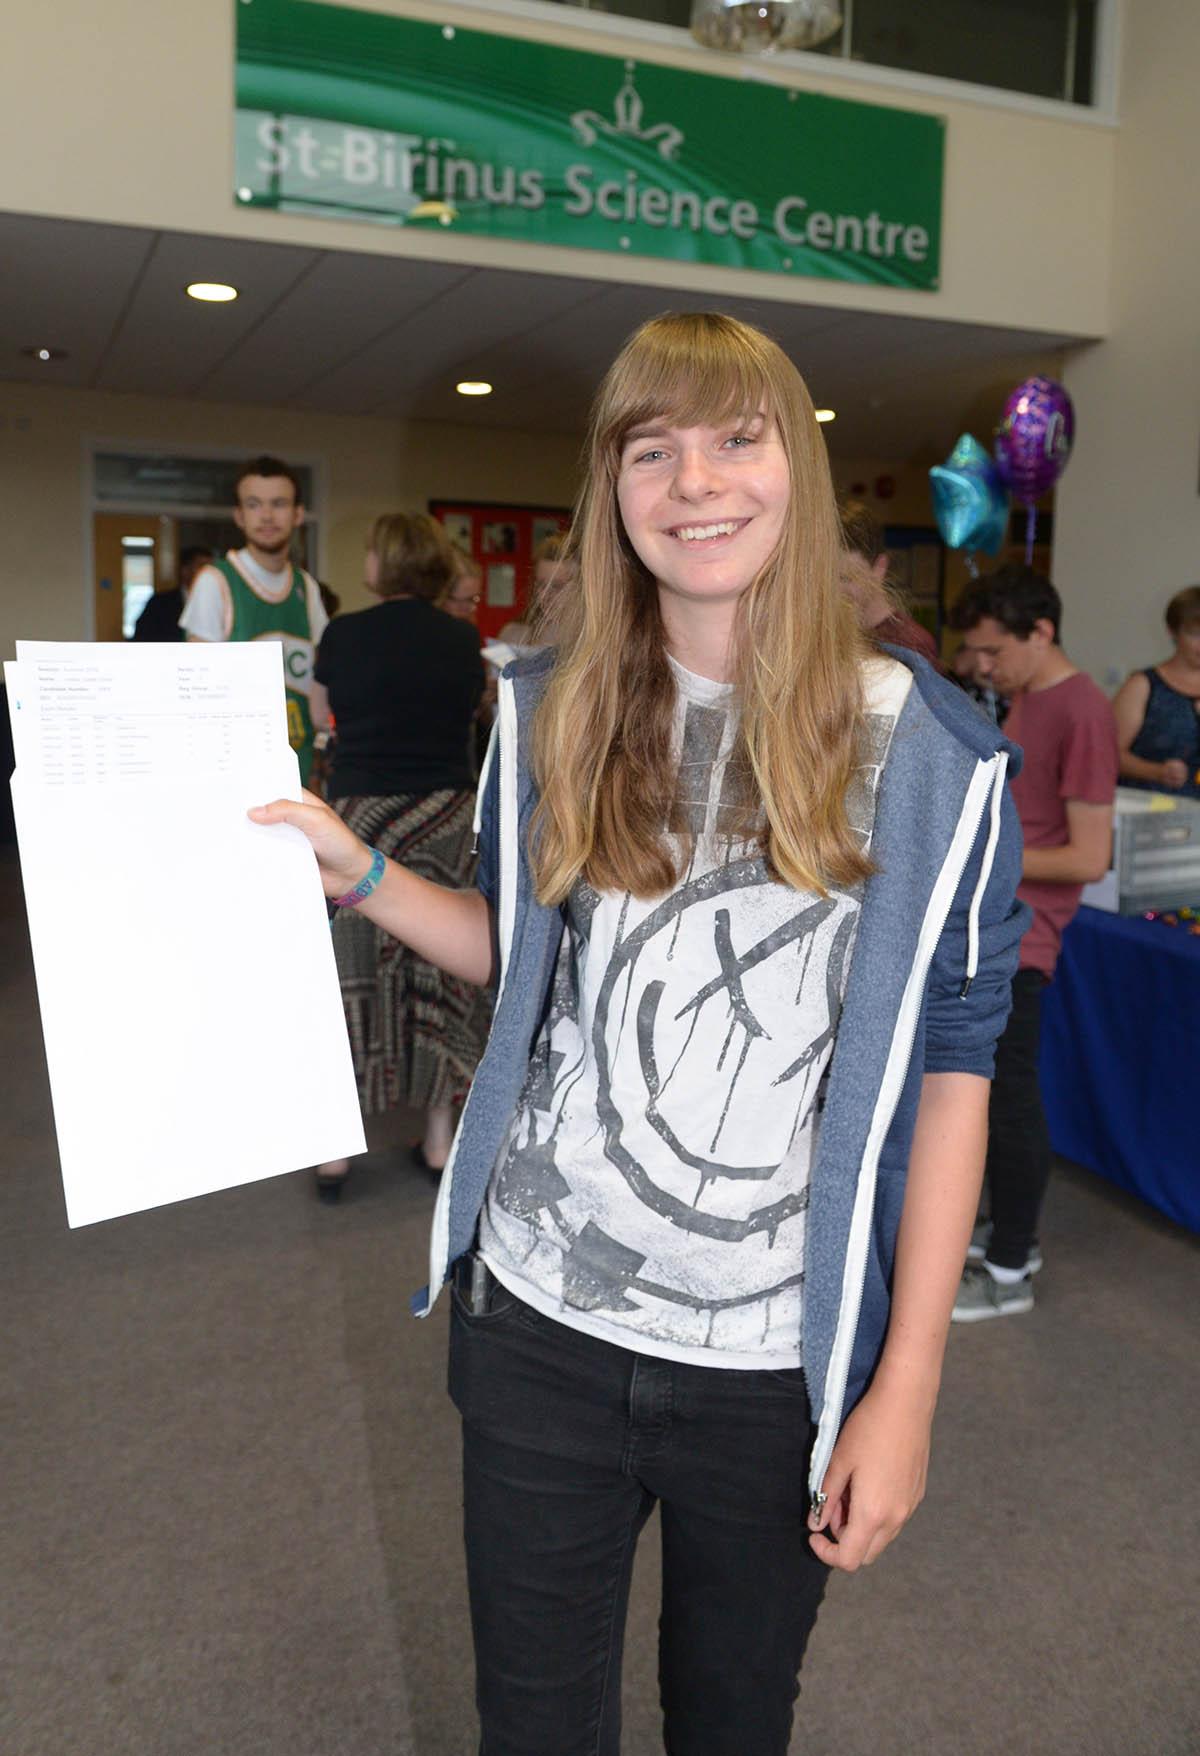 Pictures from around Oxfordshire of student receiving their A Level results, Didcot Girls School and St Birinus.